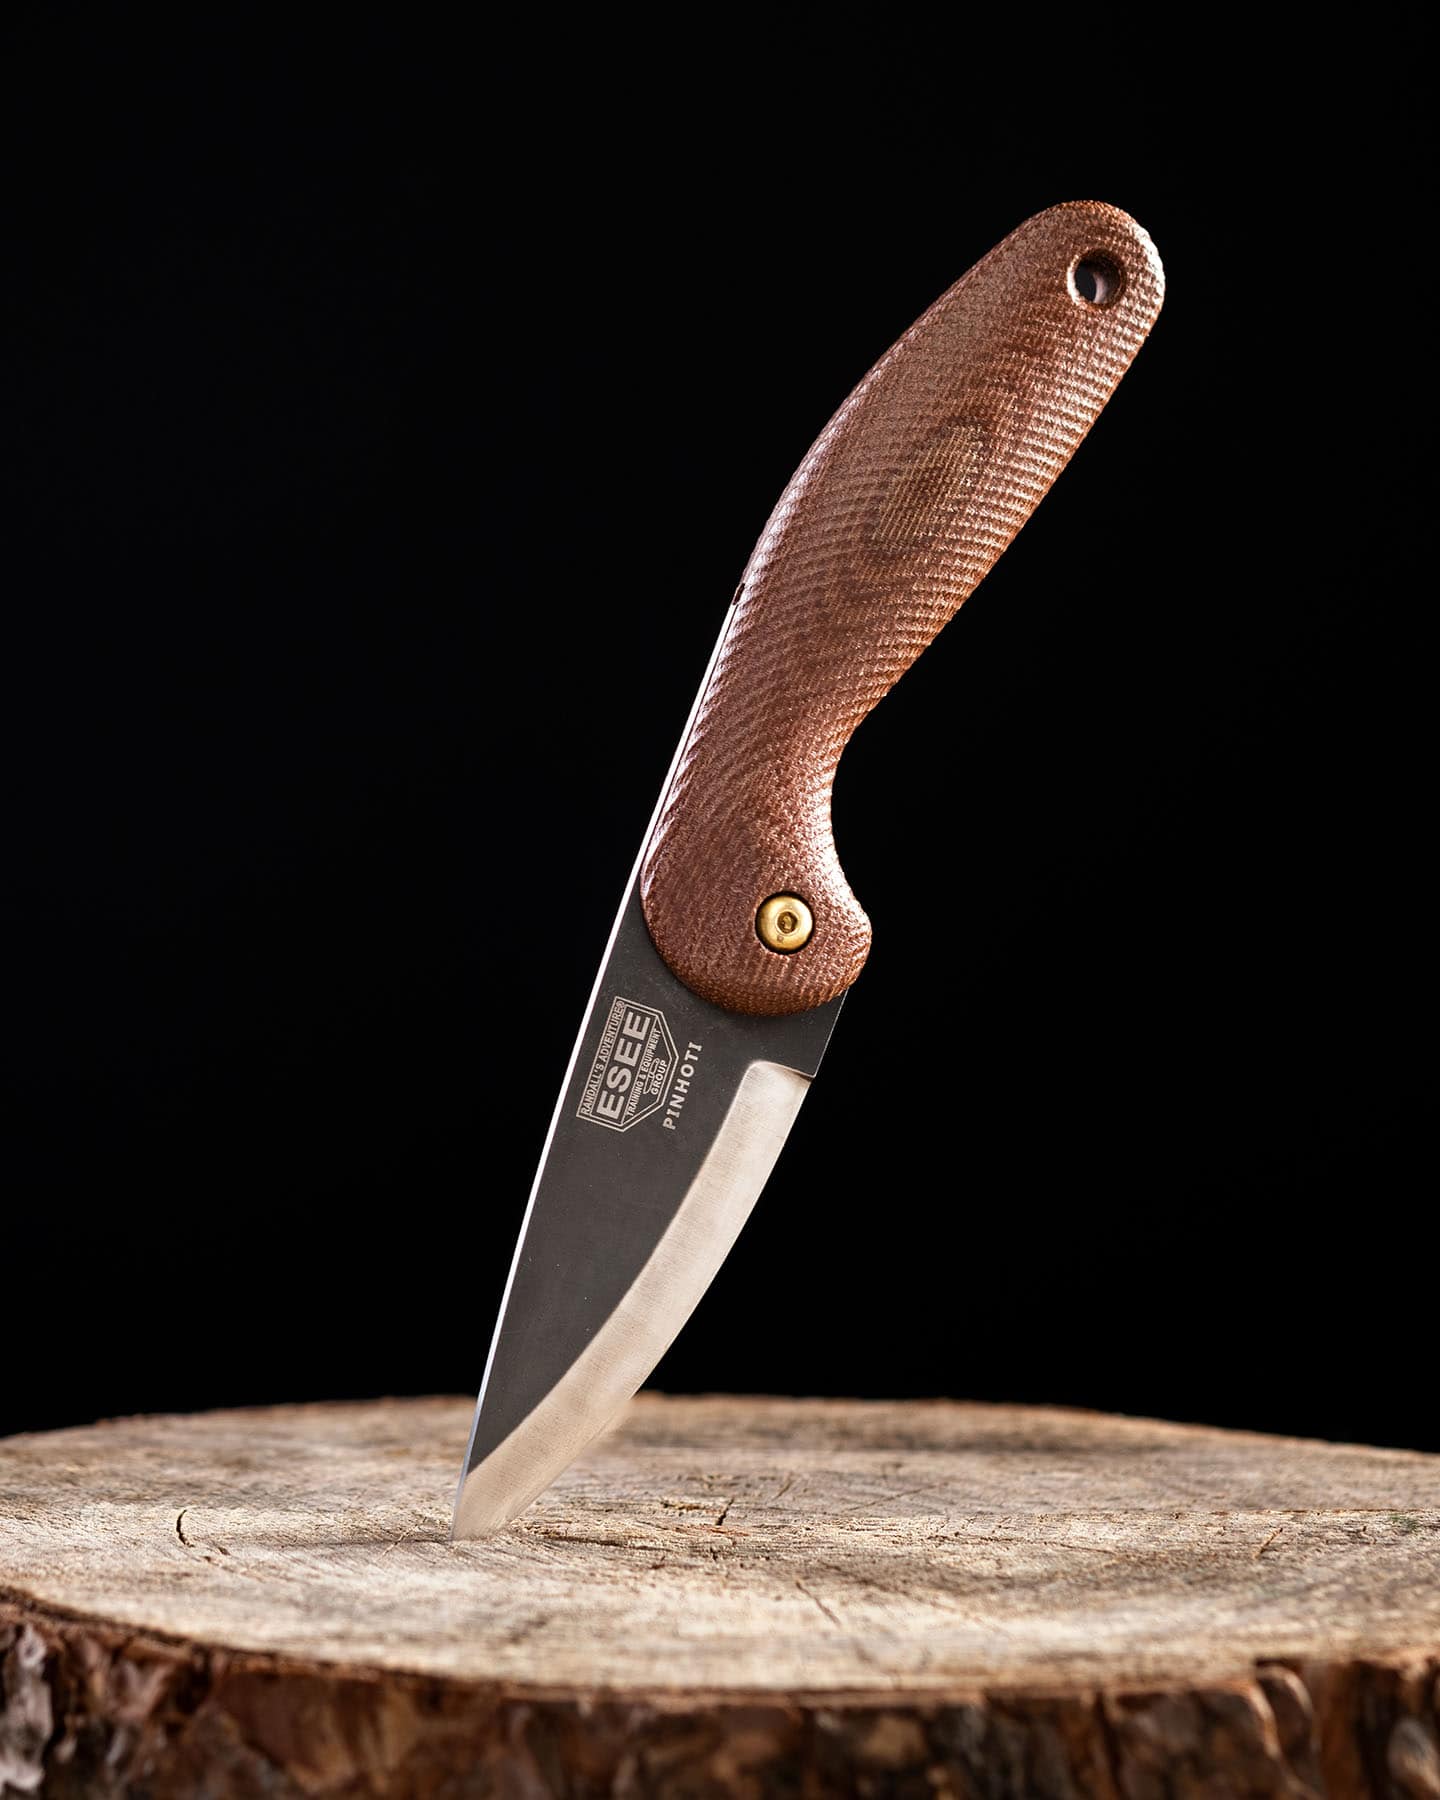 The Esee Pinhoti is a unique friction folder that is designed for tough outdoor tasks.